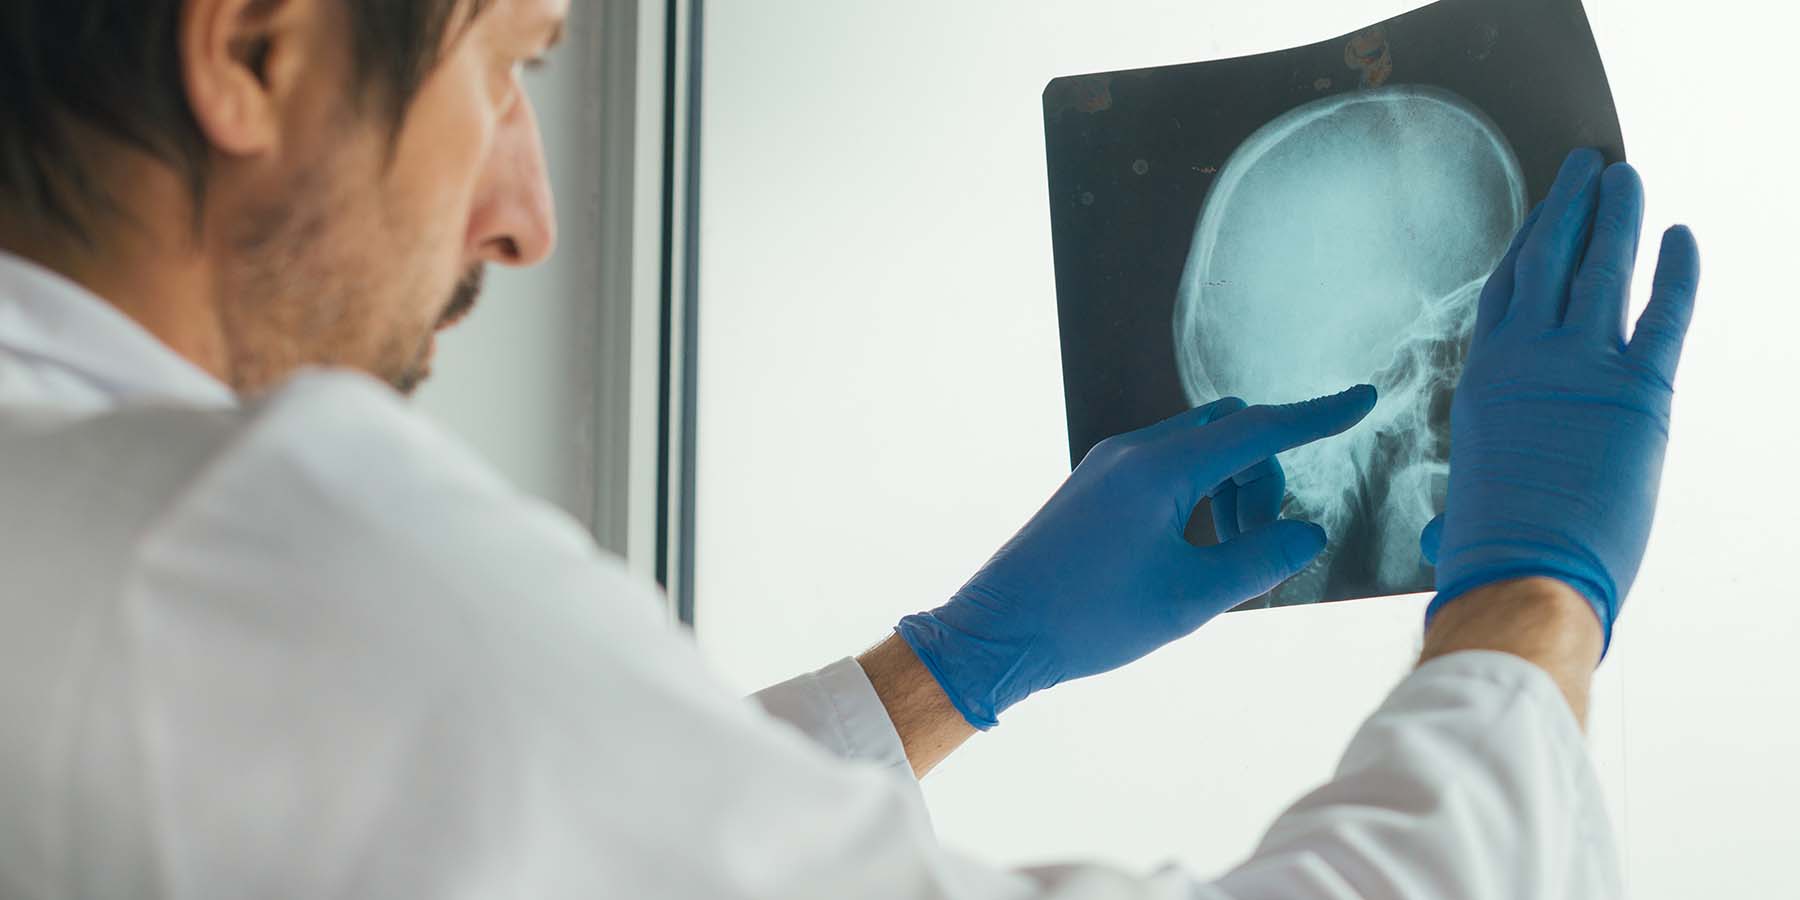 Consultant examining X-ray image of patient's skull